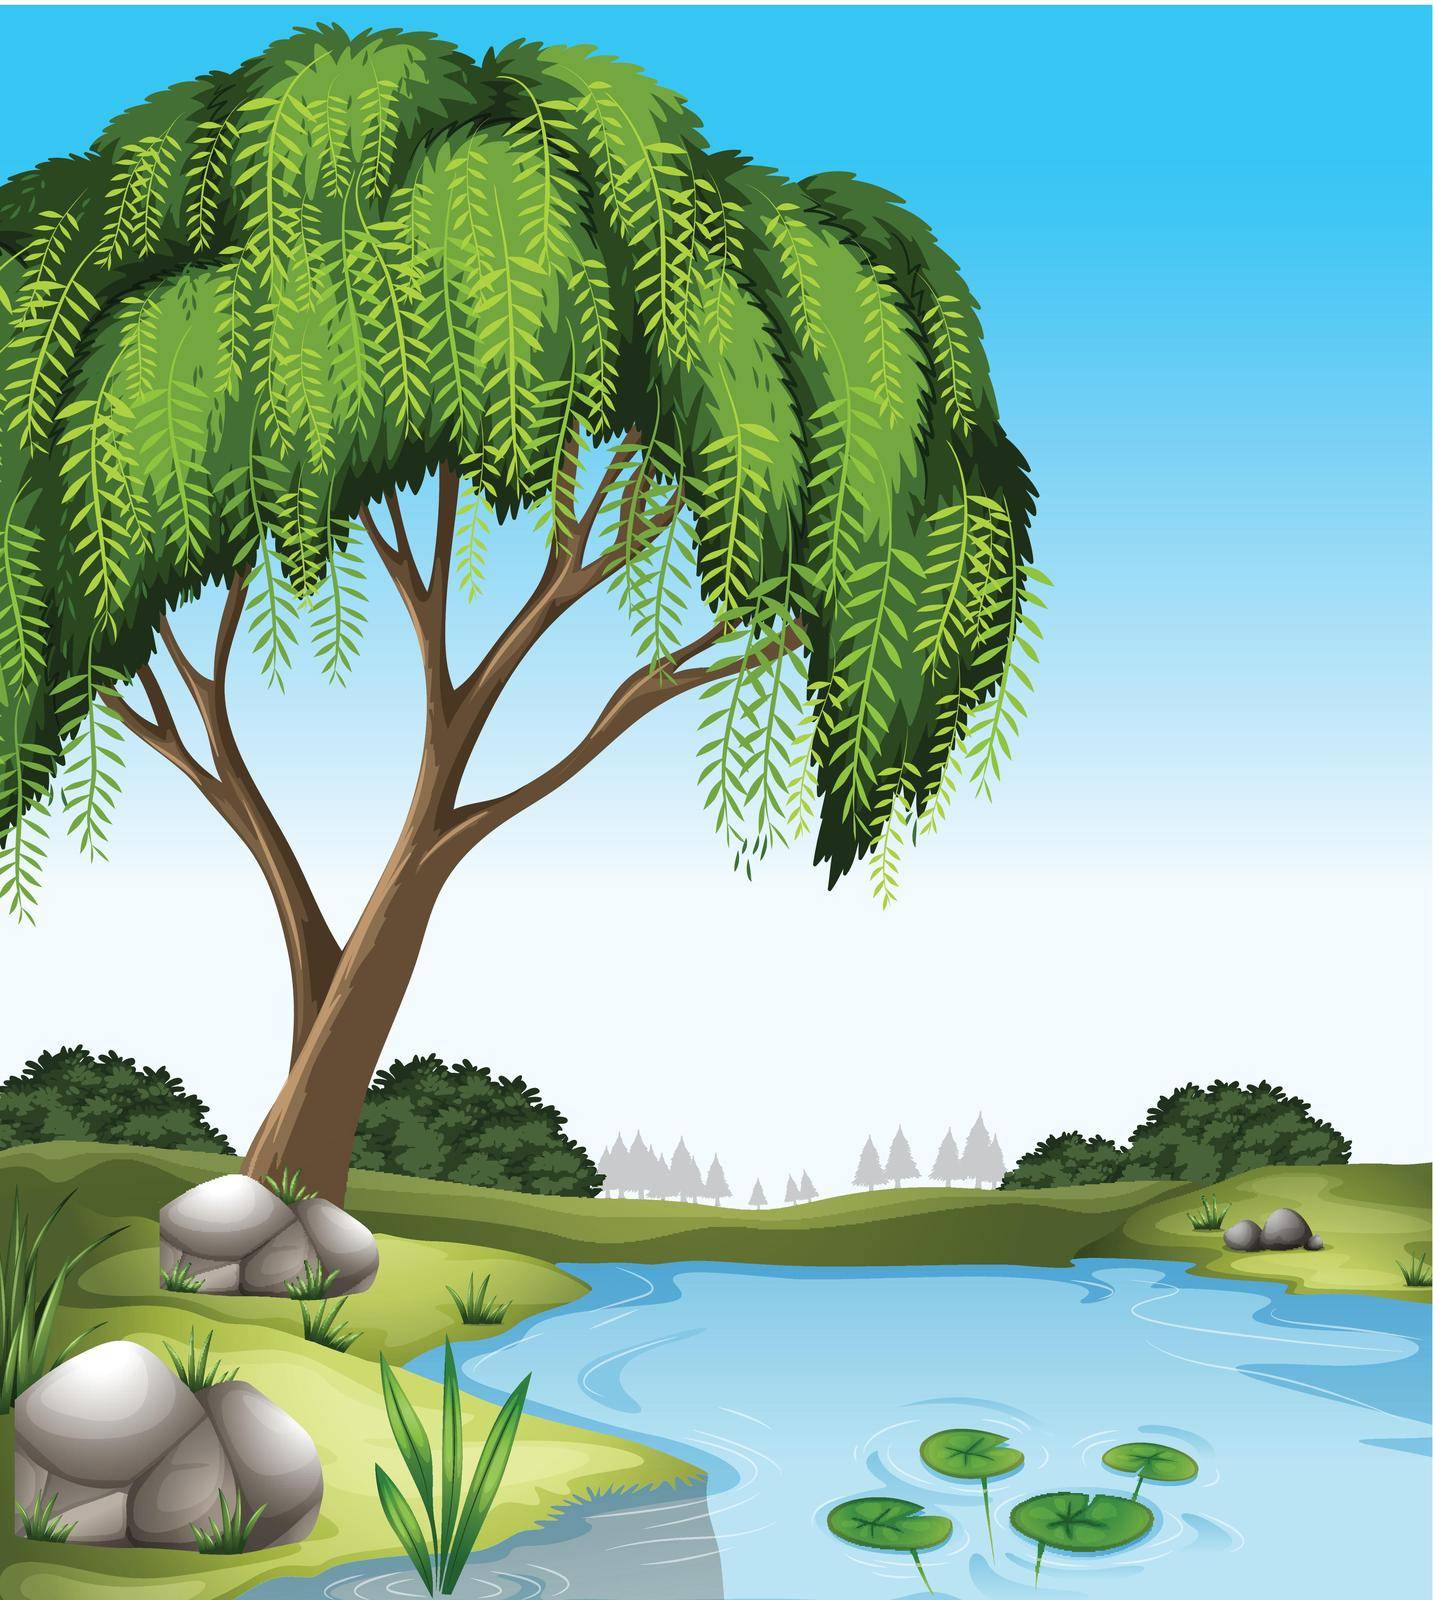 Poster of a tree at the bank of a river